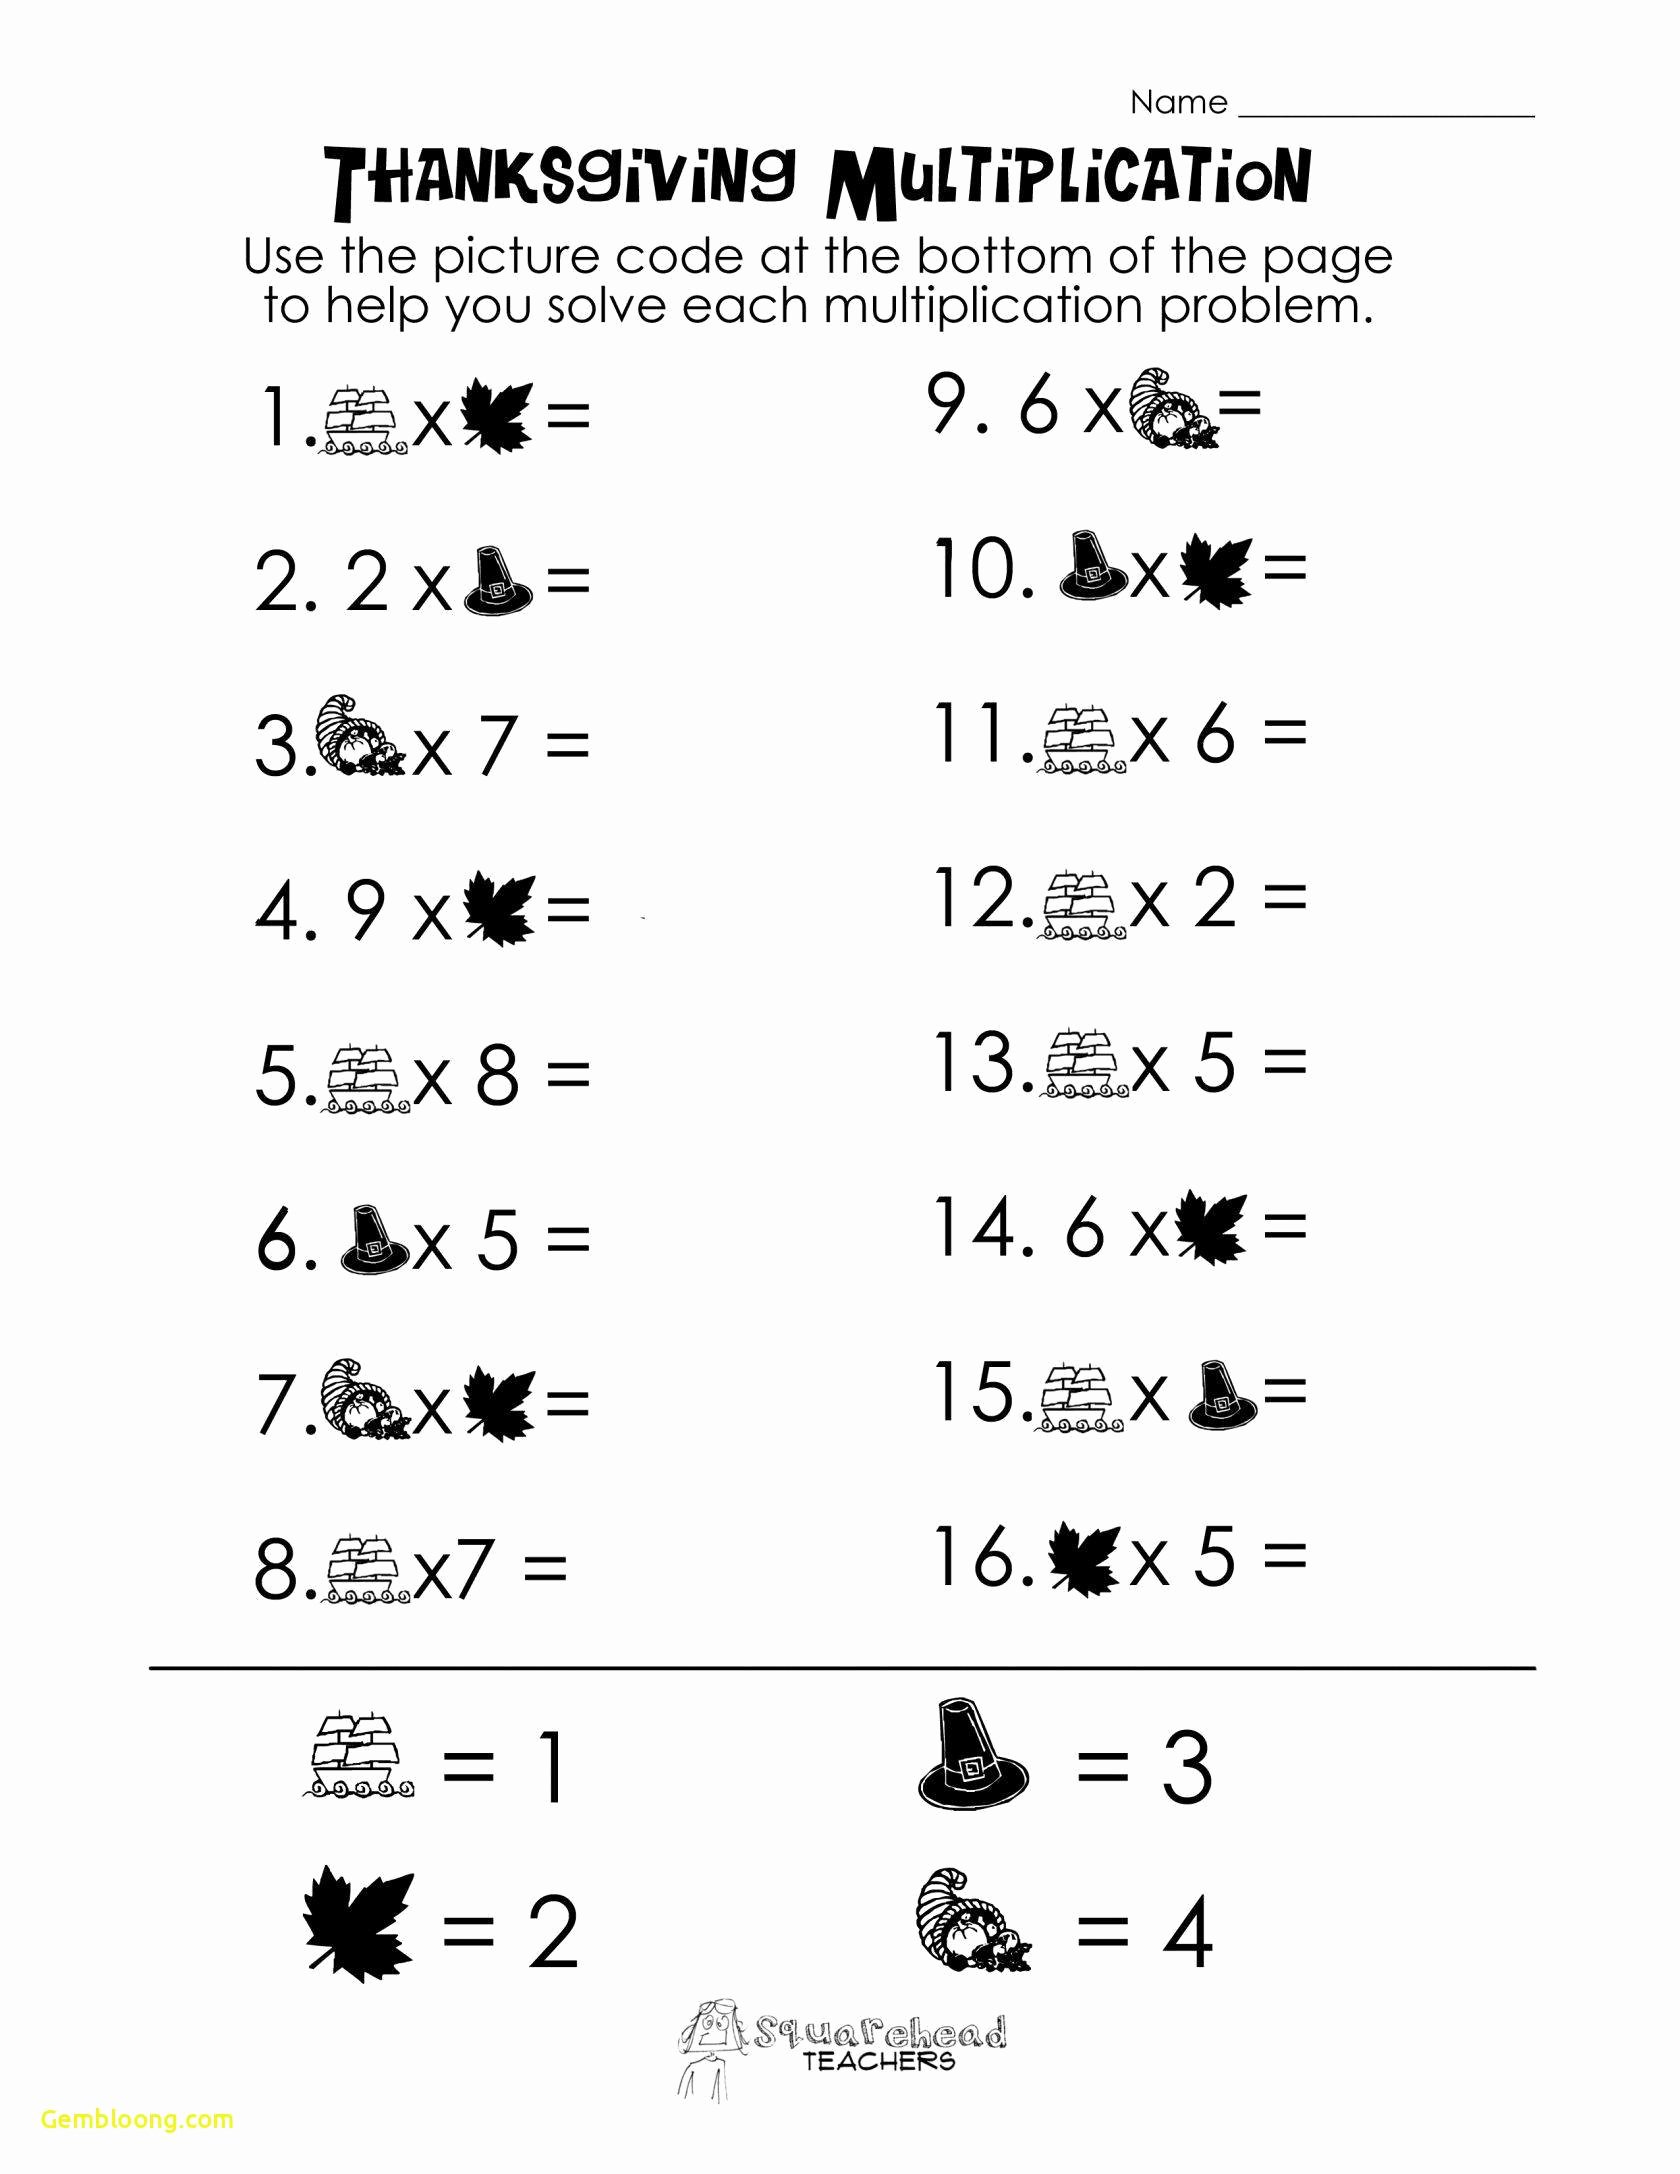 Sequences and Series Worksheet Awesome Geometric Sequences and Series Worksheet Answers